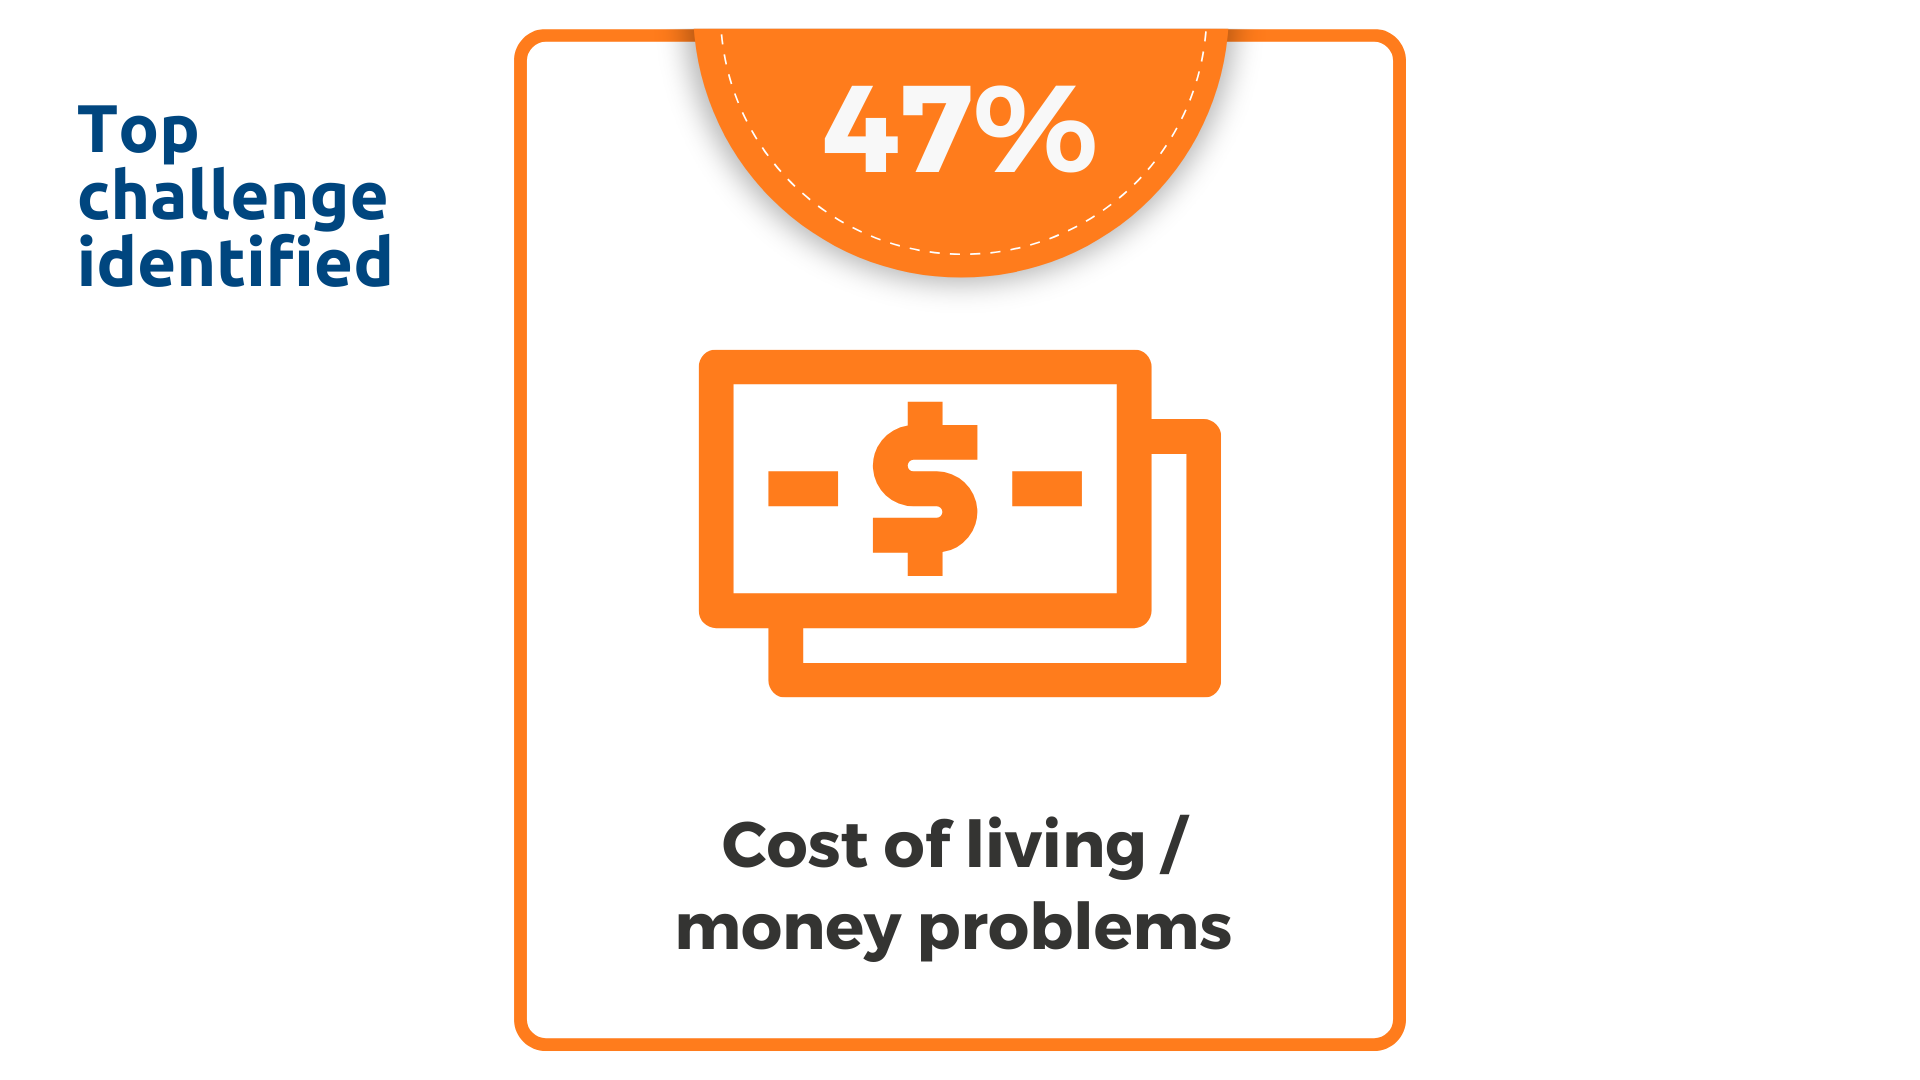 47% of respondents said they experienced cost of living or money problems in the past year